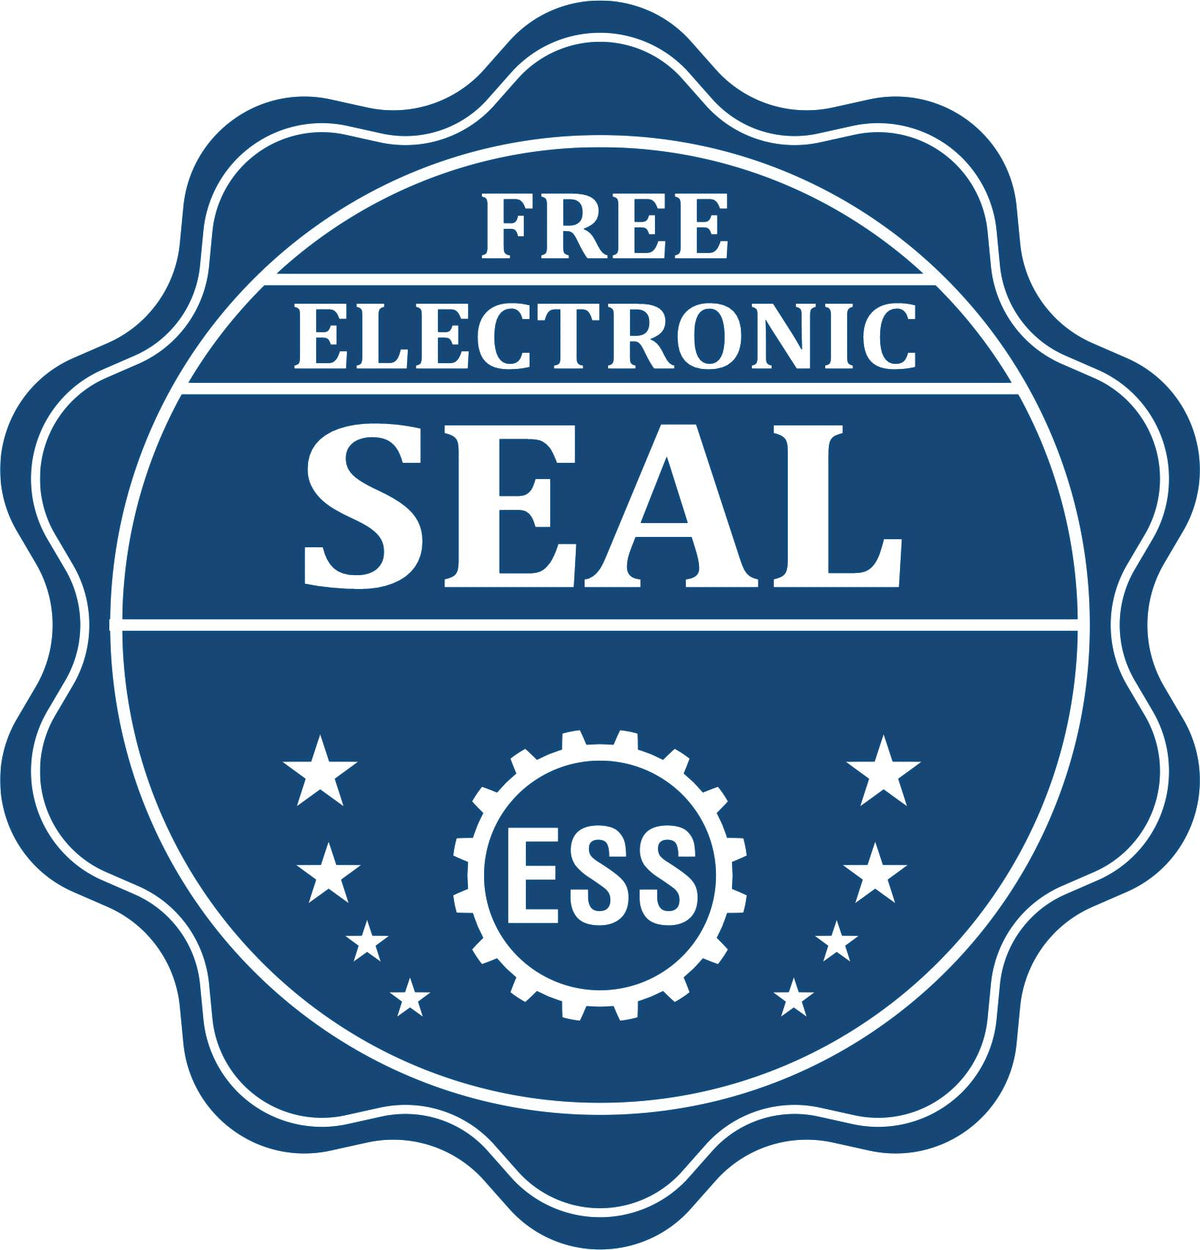 A badge showing a free electronic seal for the Heavy Duty Cast Iron Kansas Geologist Seal Embosser with stars and the ESS gear on the emblem.